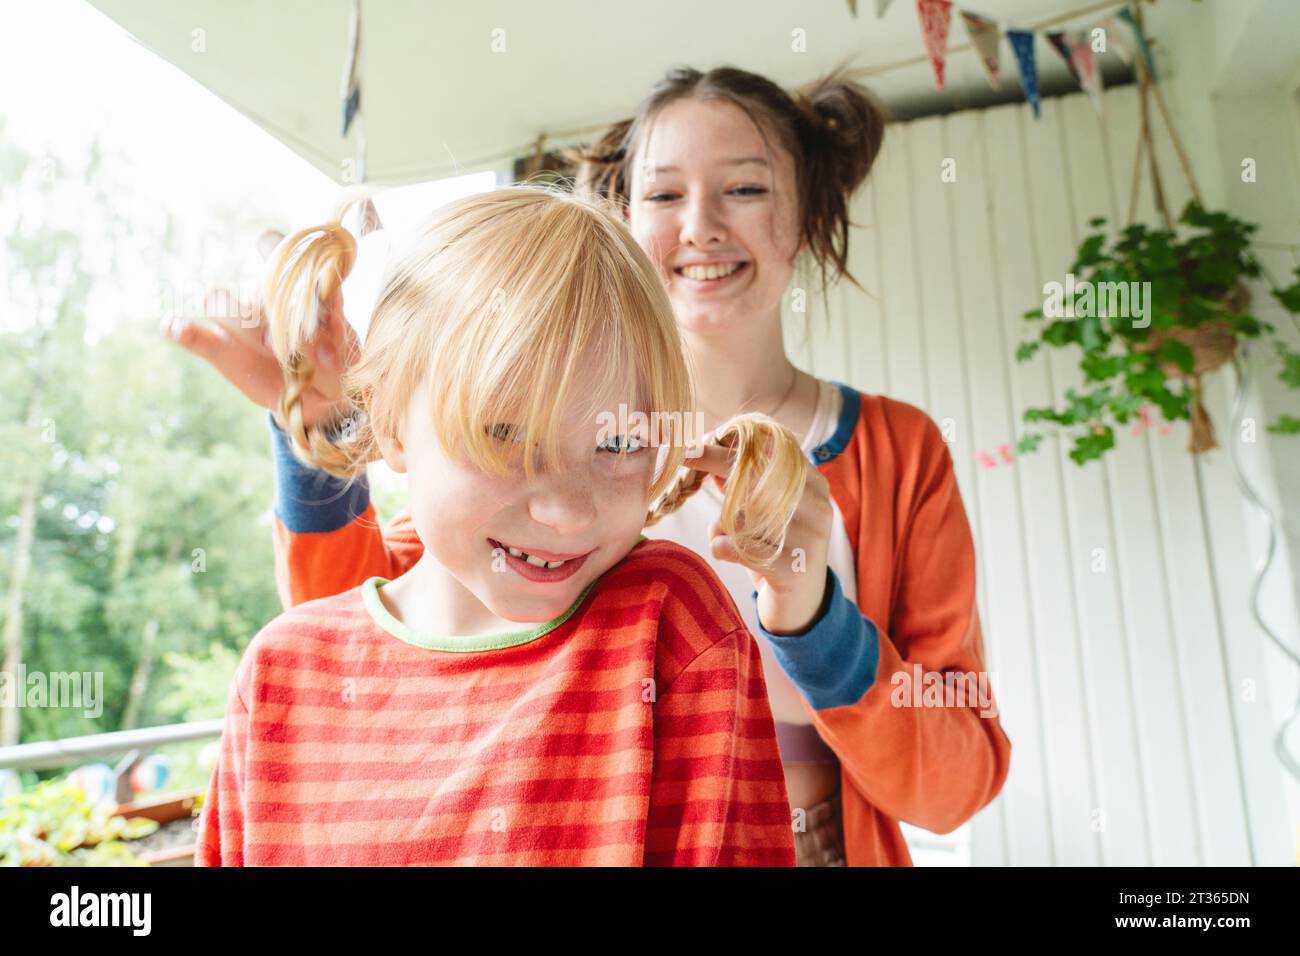 Blond girl being braided by her happy teenage sister on balcony Stock Photo